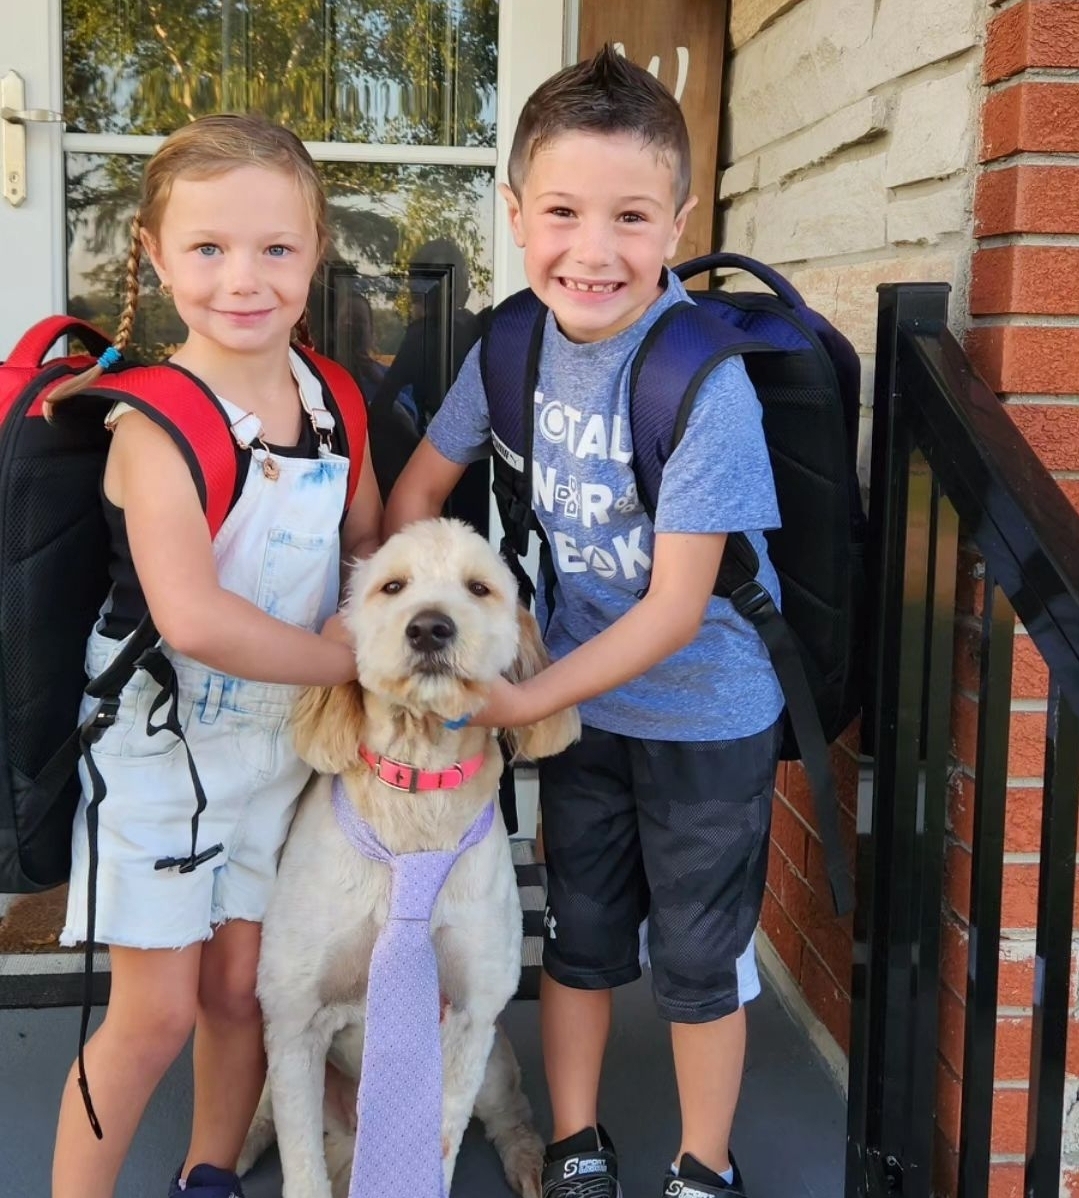 It's #NationalKidsAndPetsDay The cuties below are #AjaxFire Fire Chief’s kids Kaelyn and Brayden & their sweet pup Brinley. To help keep children safe while on their way to school, families should review bus and road safety messages throughout the year. 
@TownOfAjax